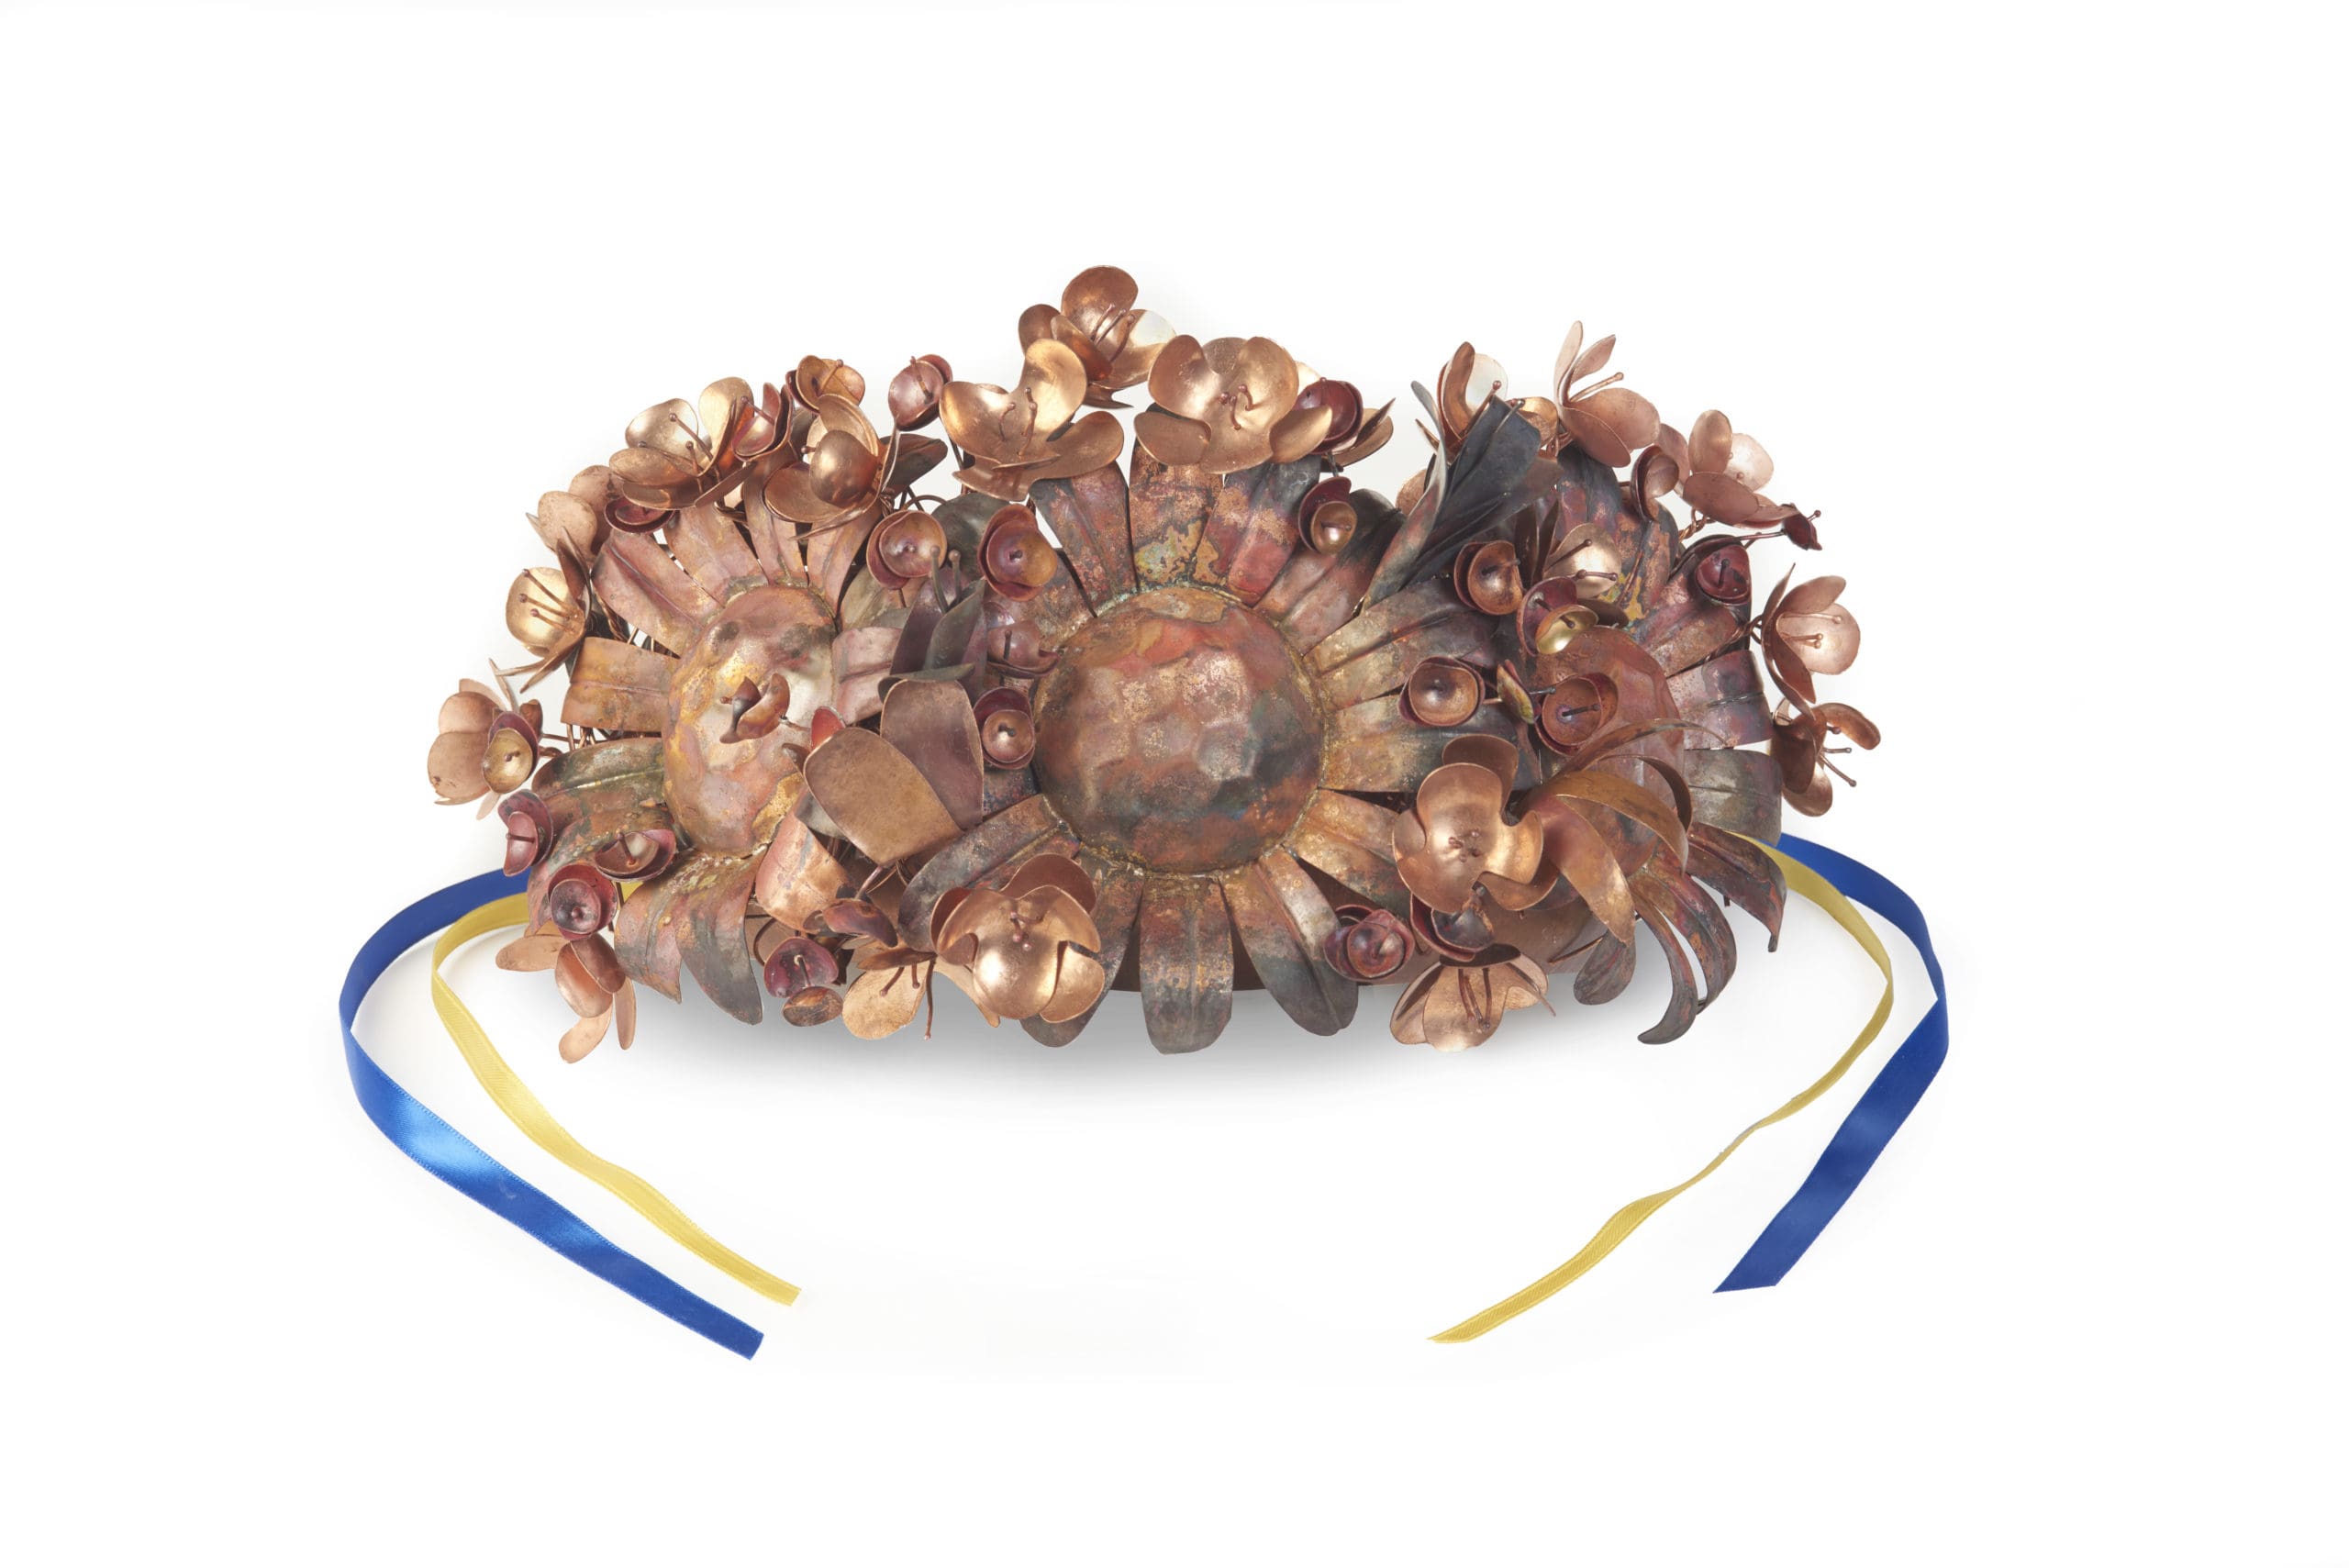 Laura Mooradian, Metalsmithing & Jewelry, copper and ribbon. Copper flowers headdress with blue and yellow ribbons. representing the Ukrainian flag.